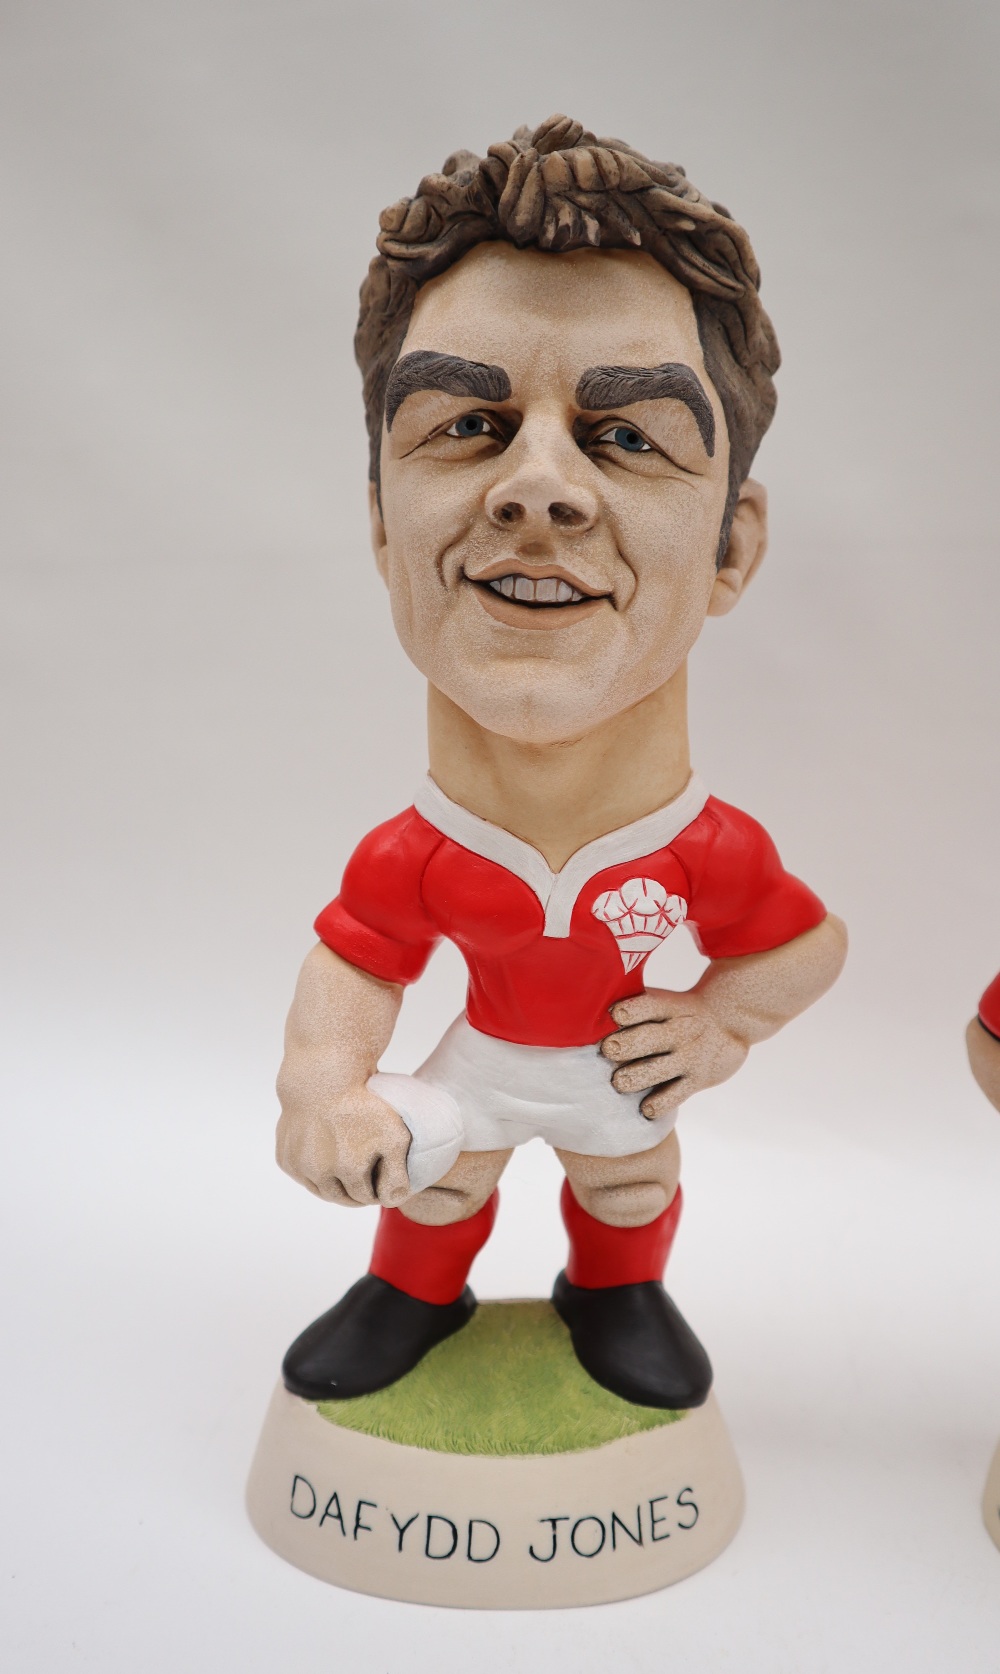 A World of Groggs Limited edition resin figure of Dafydd Jones No. - Image 2 of 6